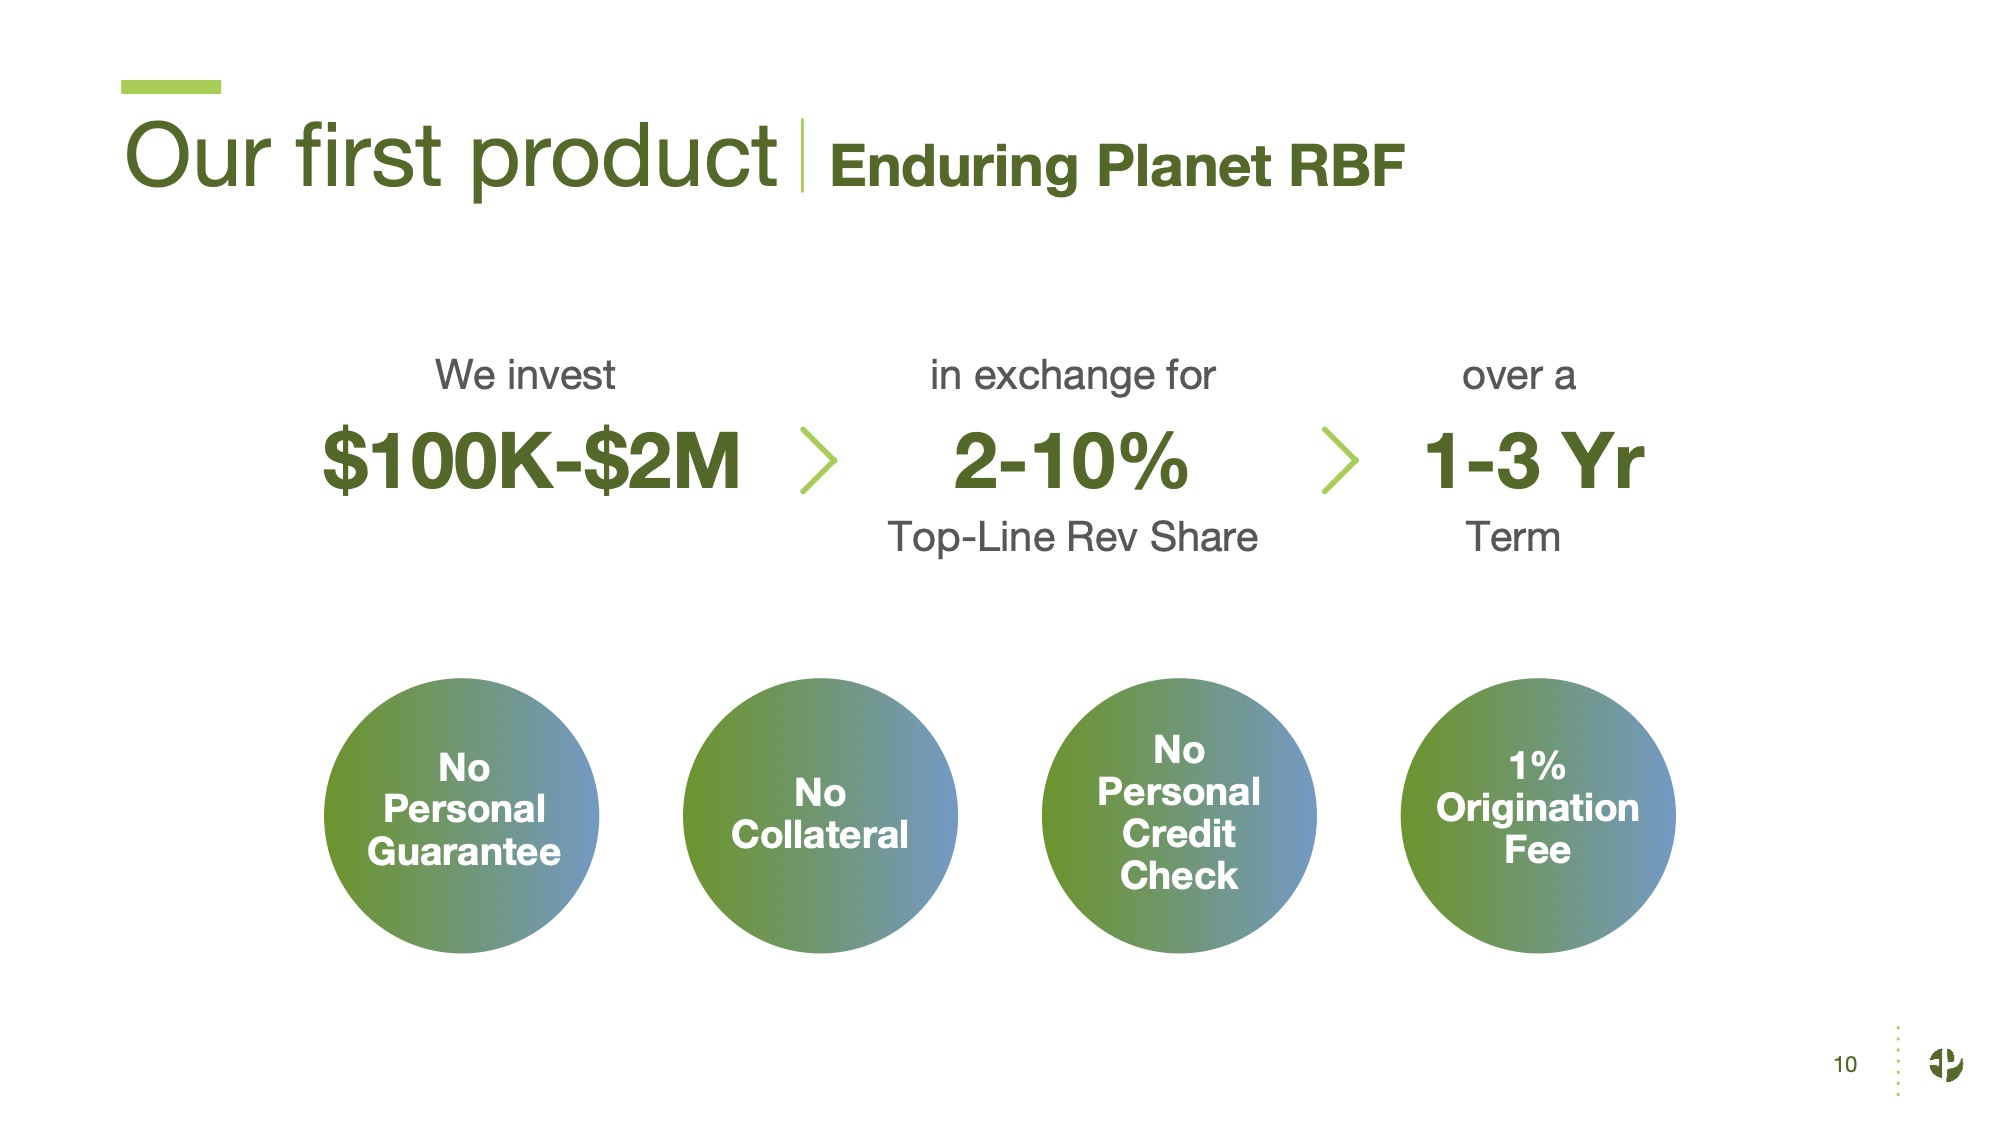 We invest in exchange for $ 100K- $ 2M 2-10% Top-Line Rev Share over a 1-3 Yr Term